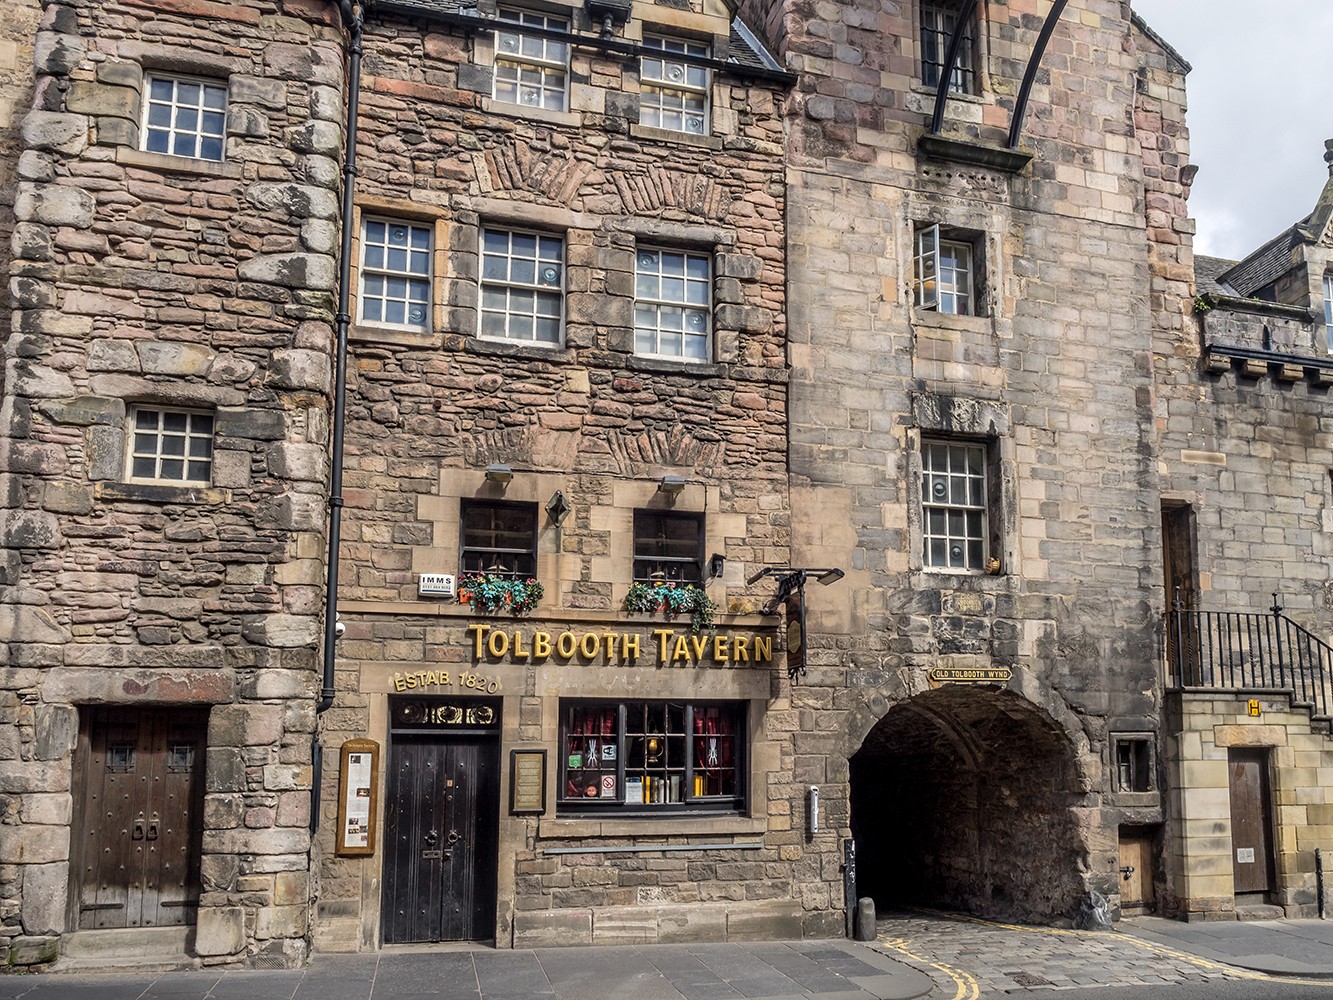 Tolbooth Tavern - Best places to take Instagram photos in Edinburgh Scotland by travel blogger My Beauty Bunny - Best Photo Spots in Edinburgh that are Instagram Friendly featured by popular Los Angeles travel blogger, My Beauty Bunny